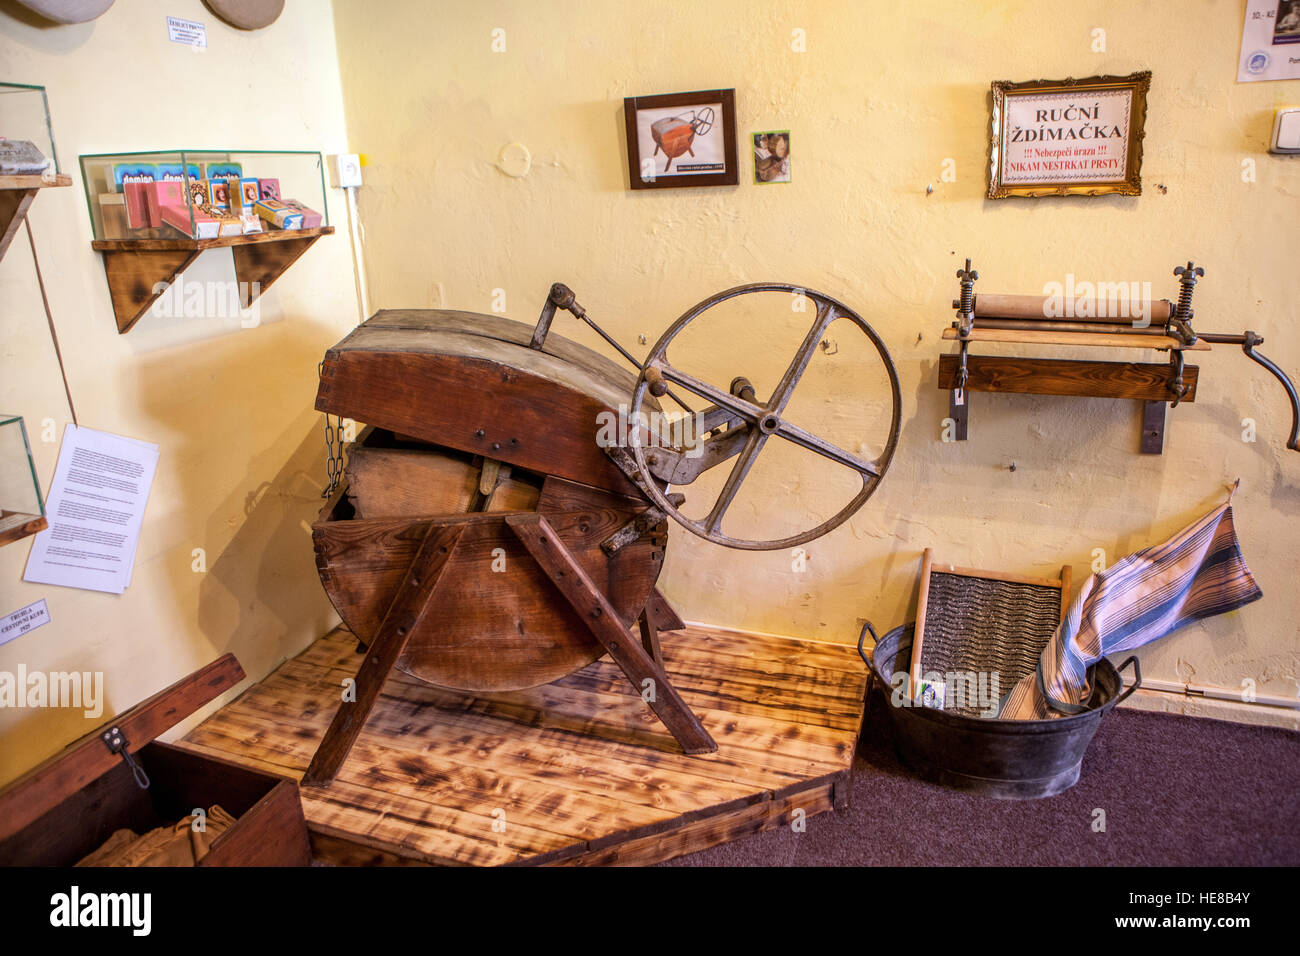 The museum of exhibition about the history of washing and ironing, Czech Republic Stock Photo